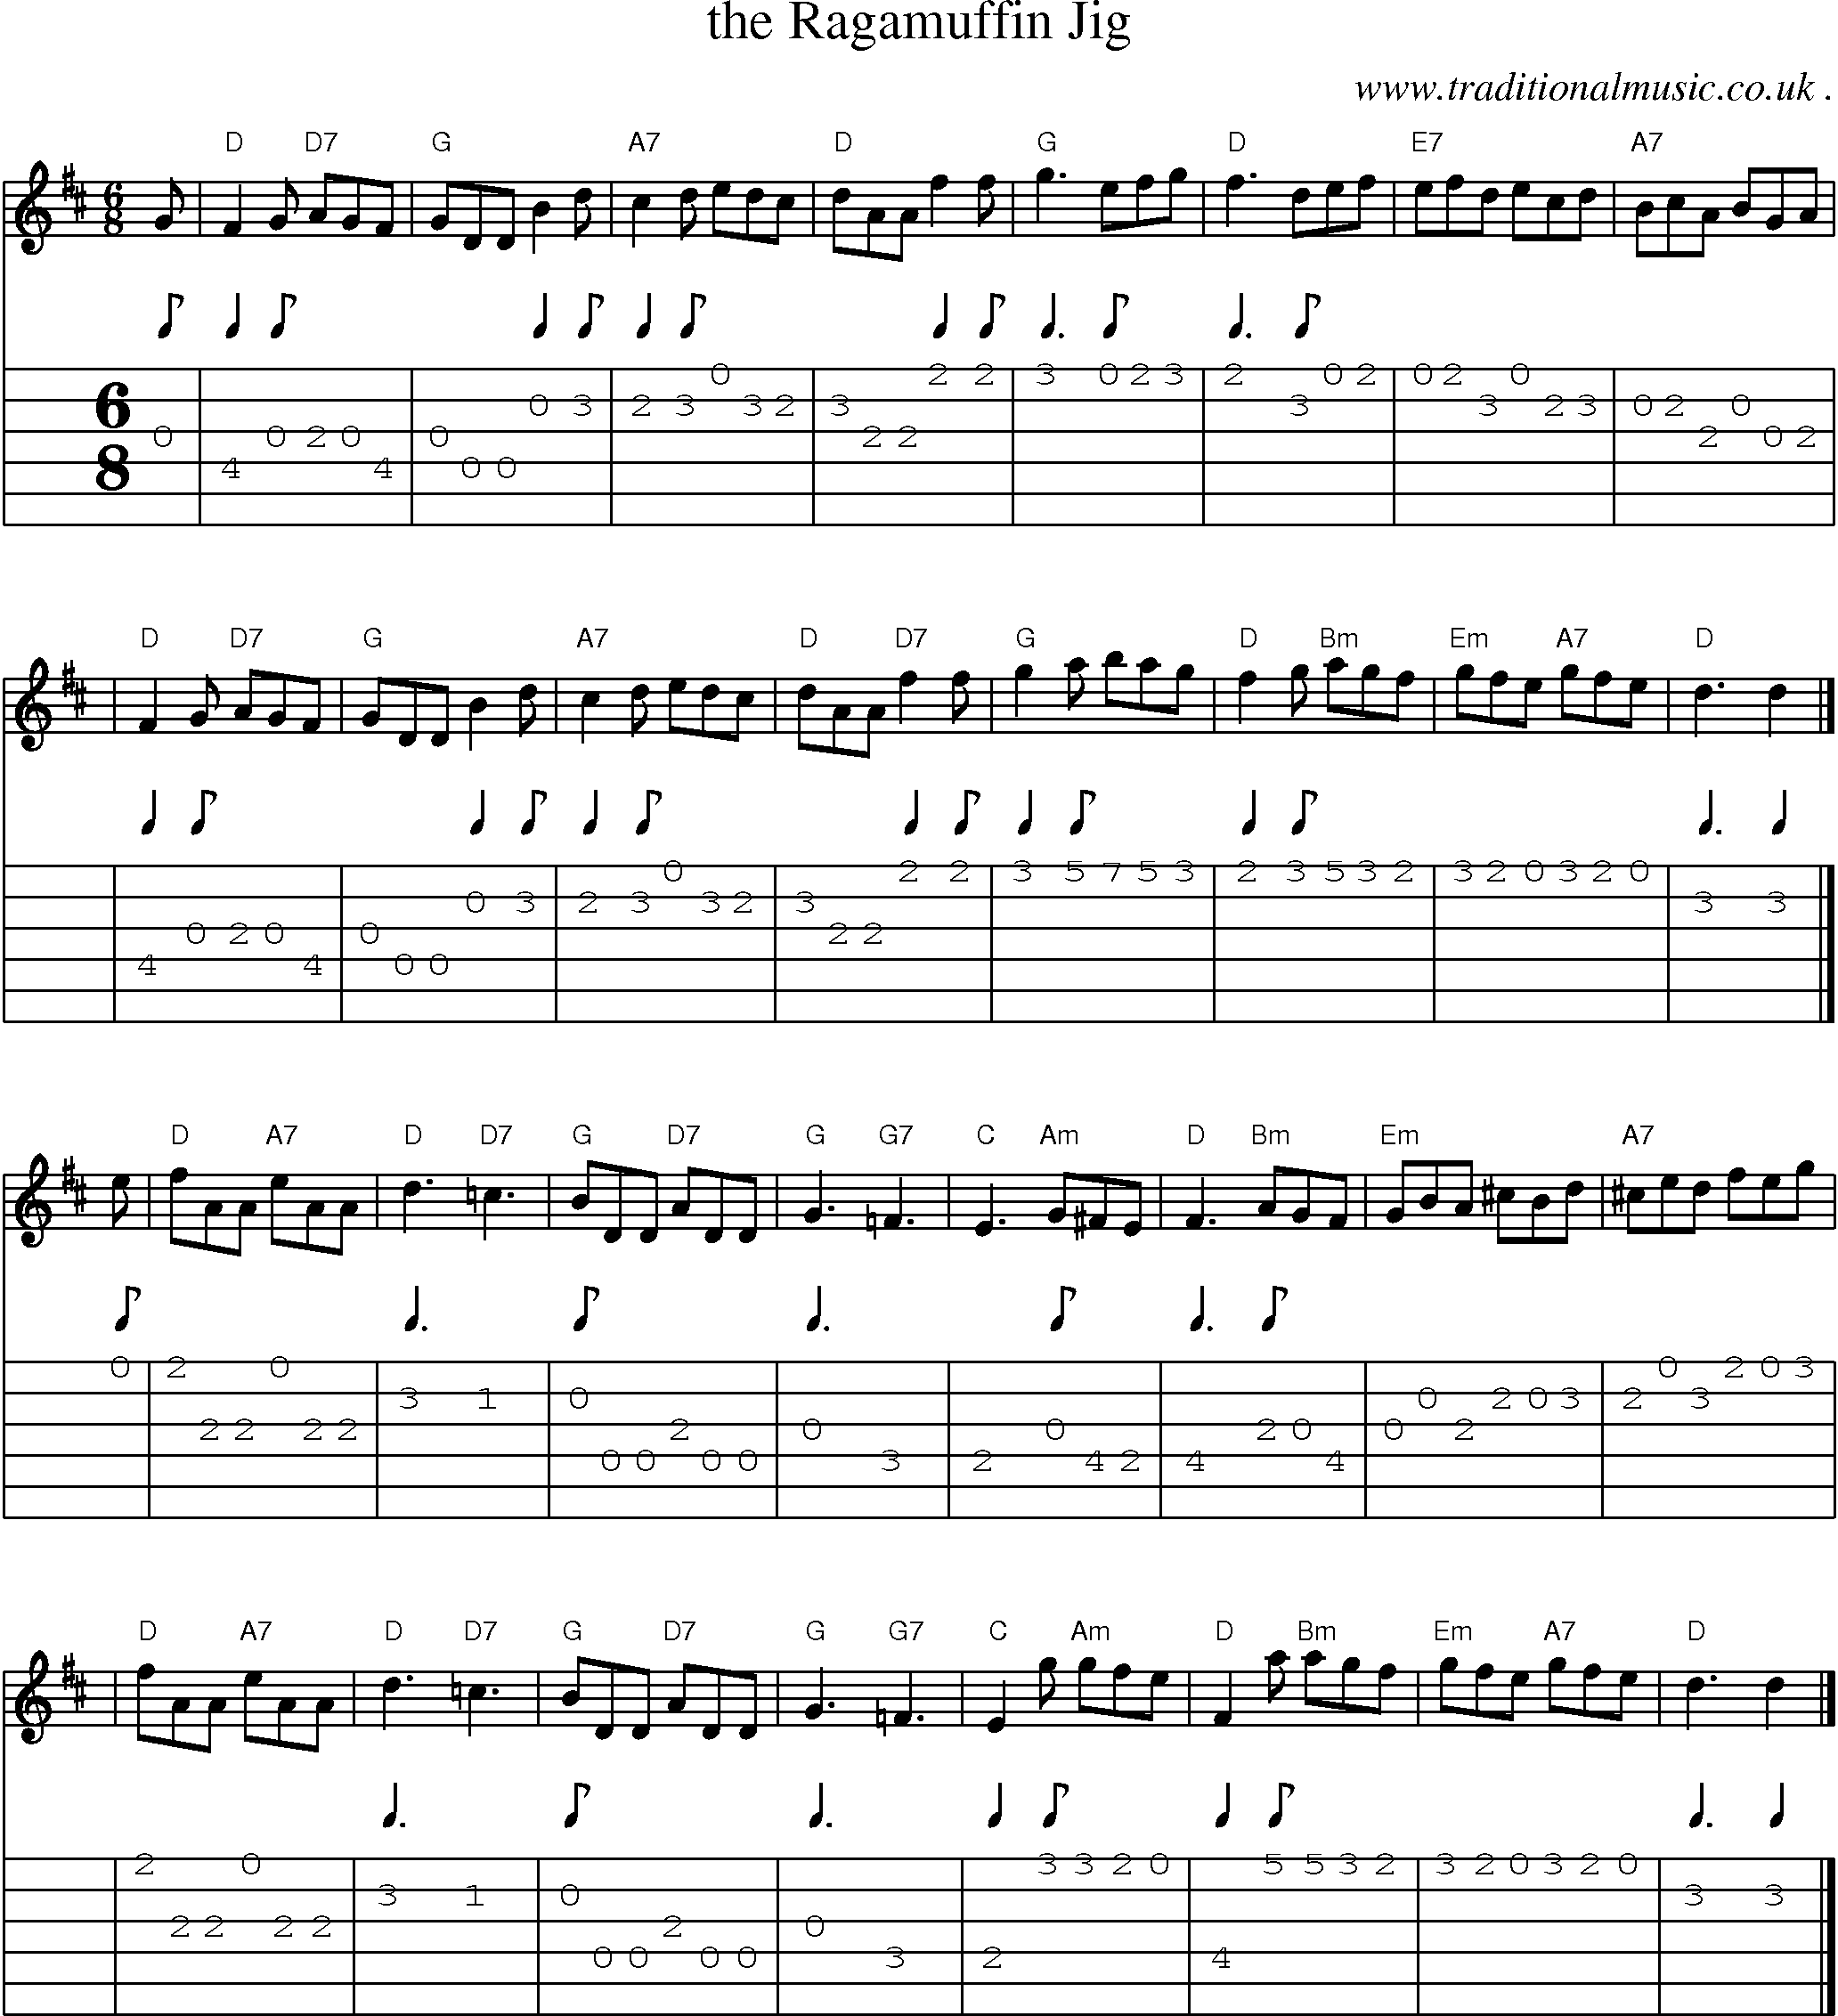 Sheet-music  score, Chords and Guitar Tabs for The Ragamuffin Jig